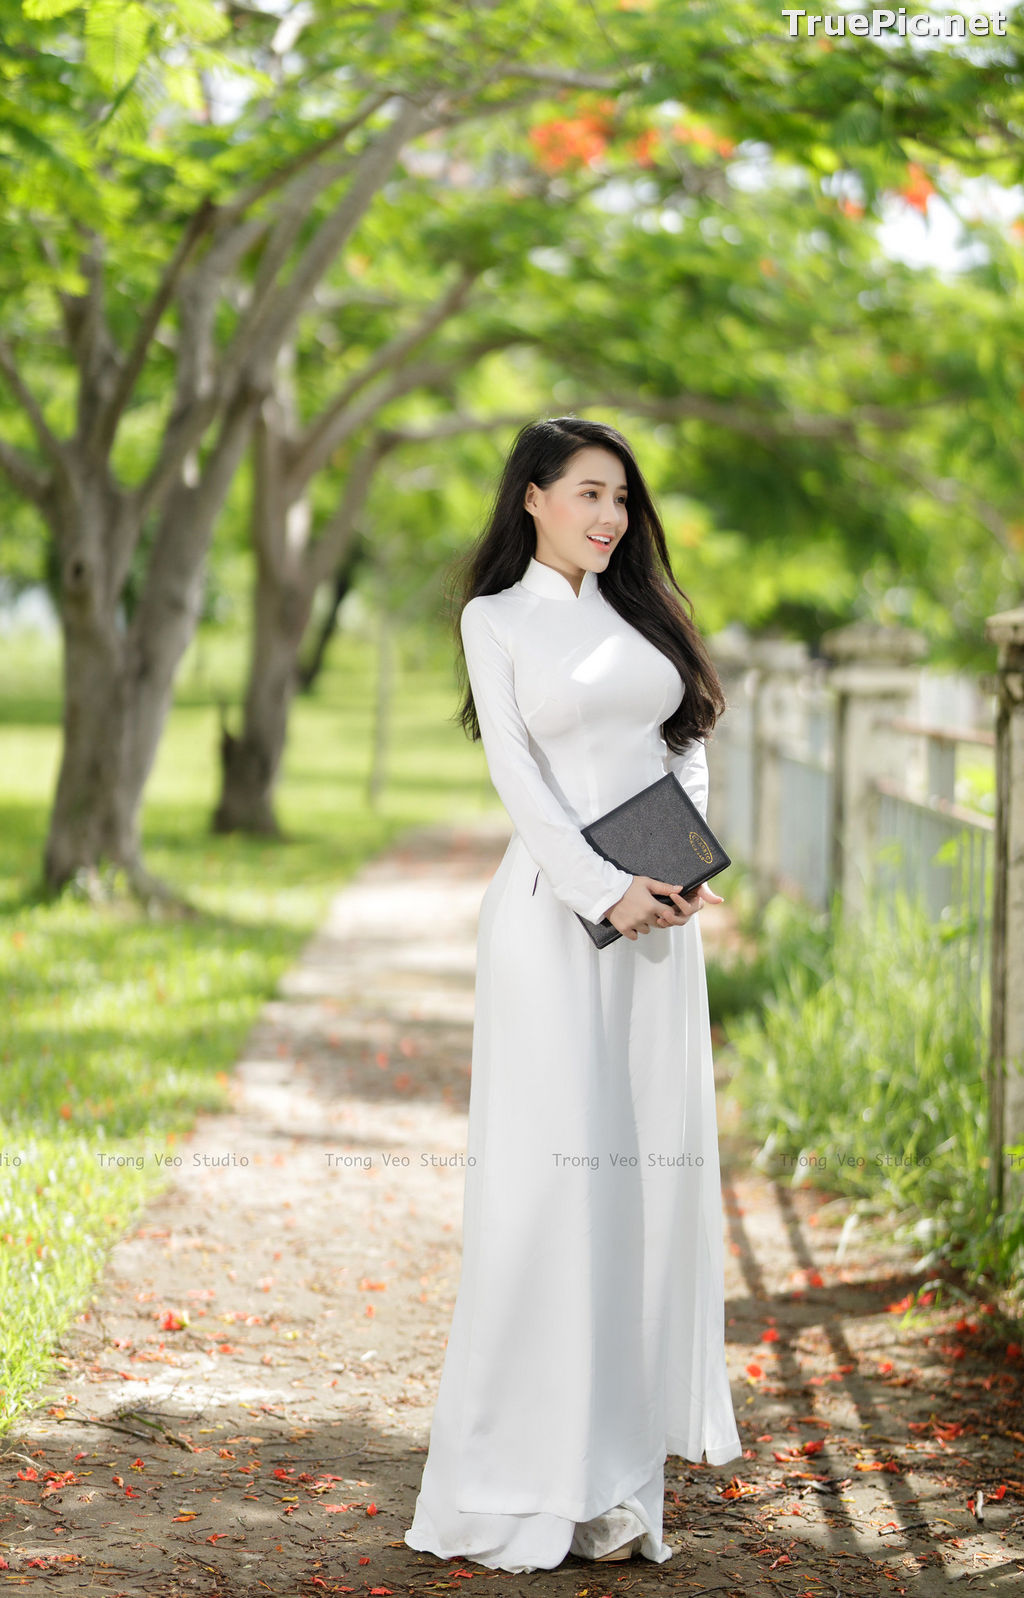 Image The Beauty of Vietnamese Girls with Traditional Dress (Ao Dai) #1 - TruePic.net - Picture-65